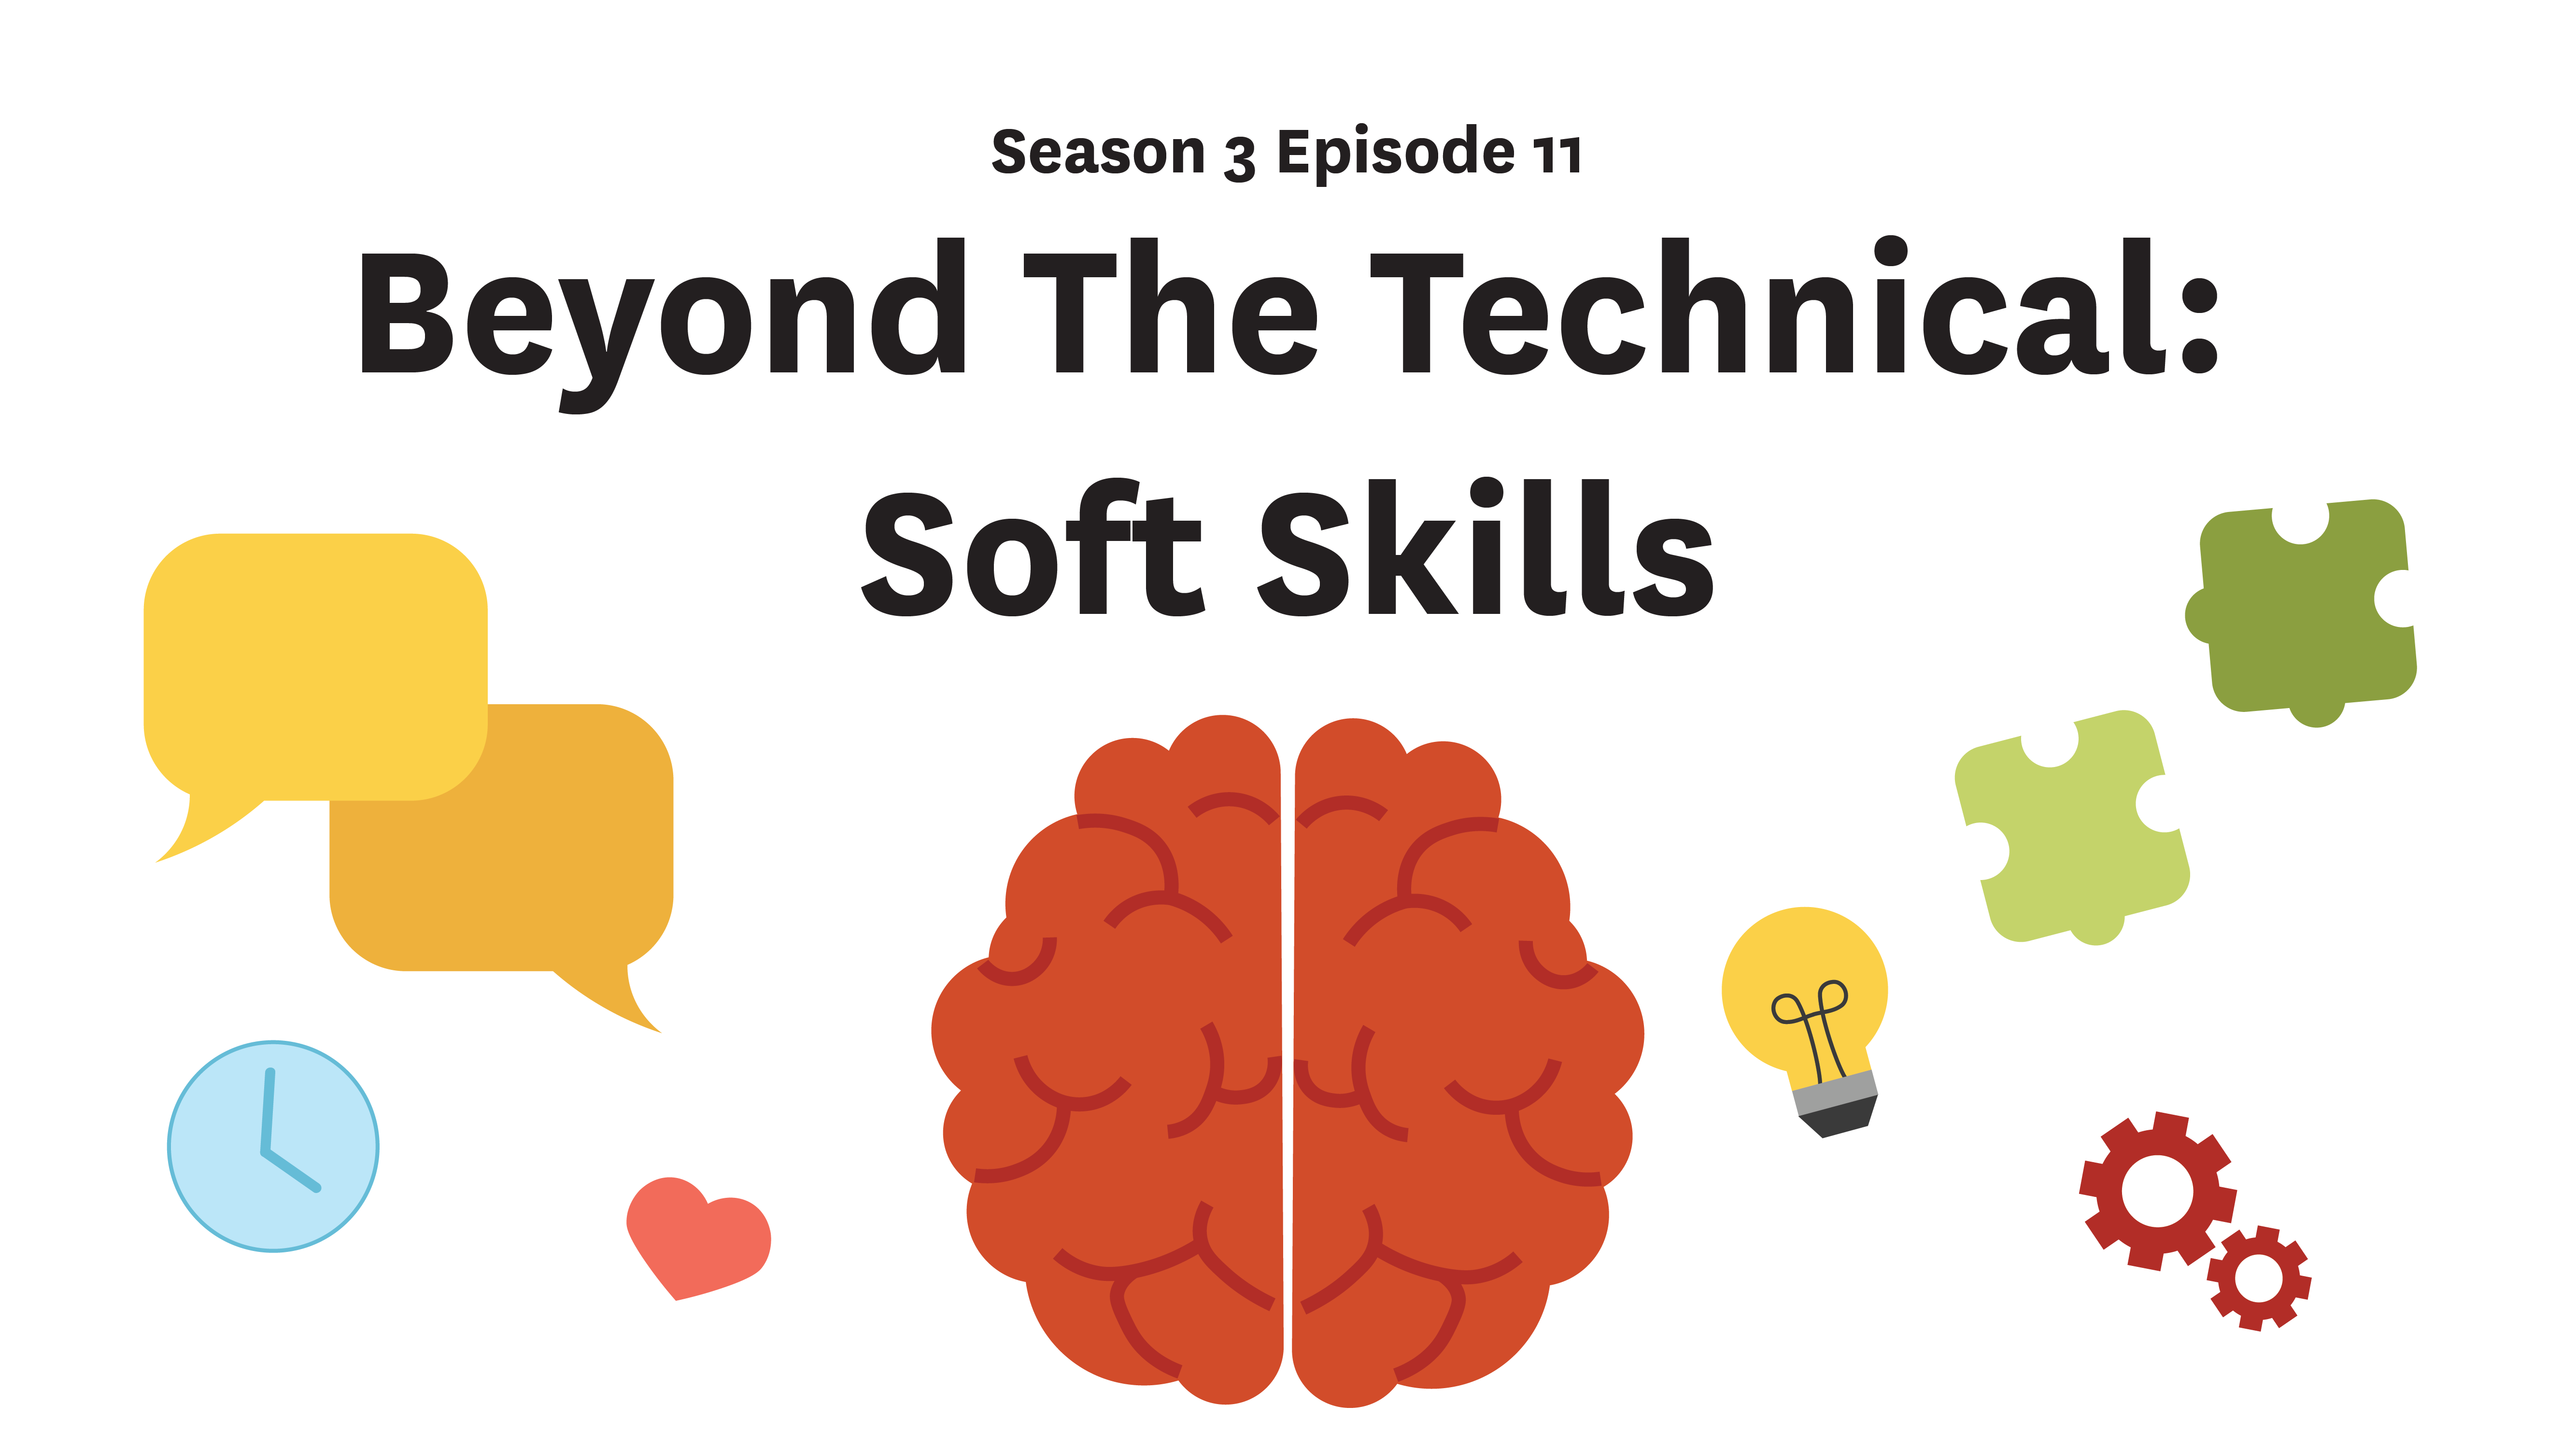 Beyond the Technical: Soft Skills